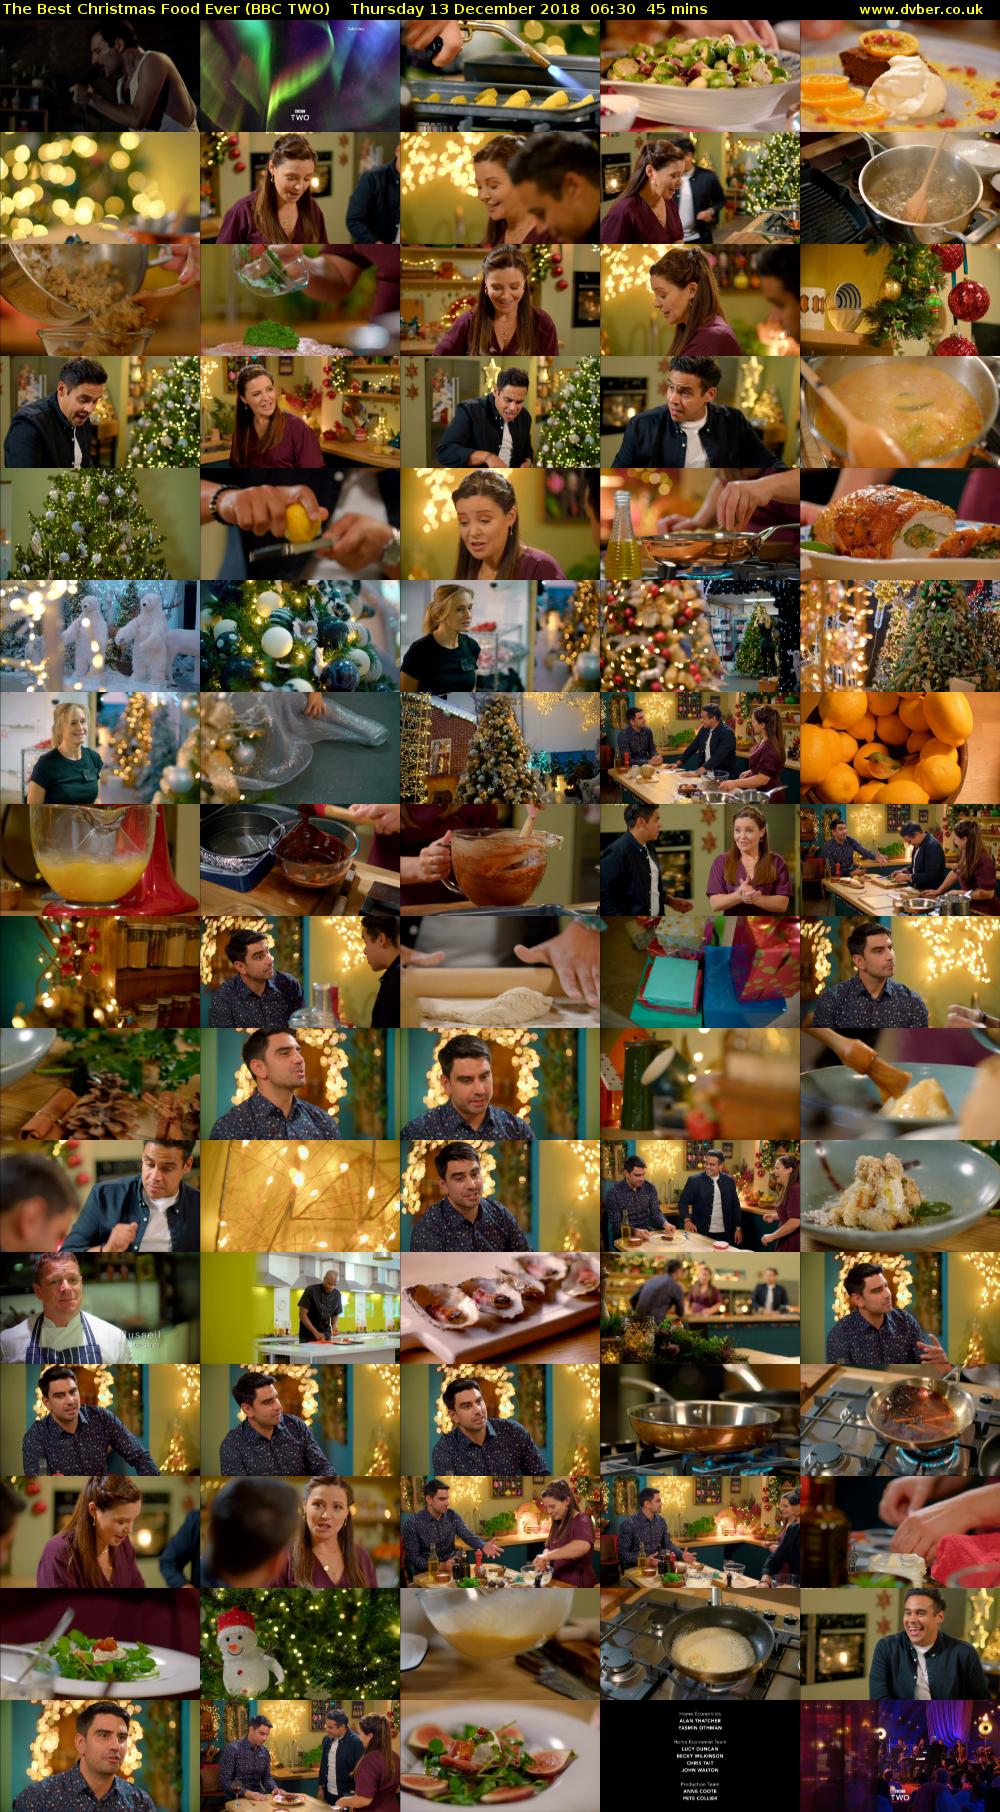 The Best Christmas Food Ever (BBC TWO) Thursday 13 December 2018 06:30 - 07:15